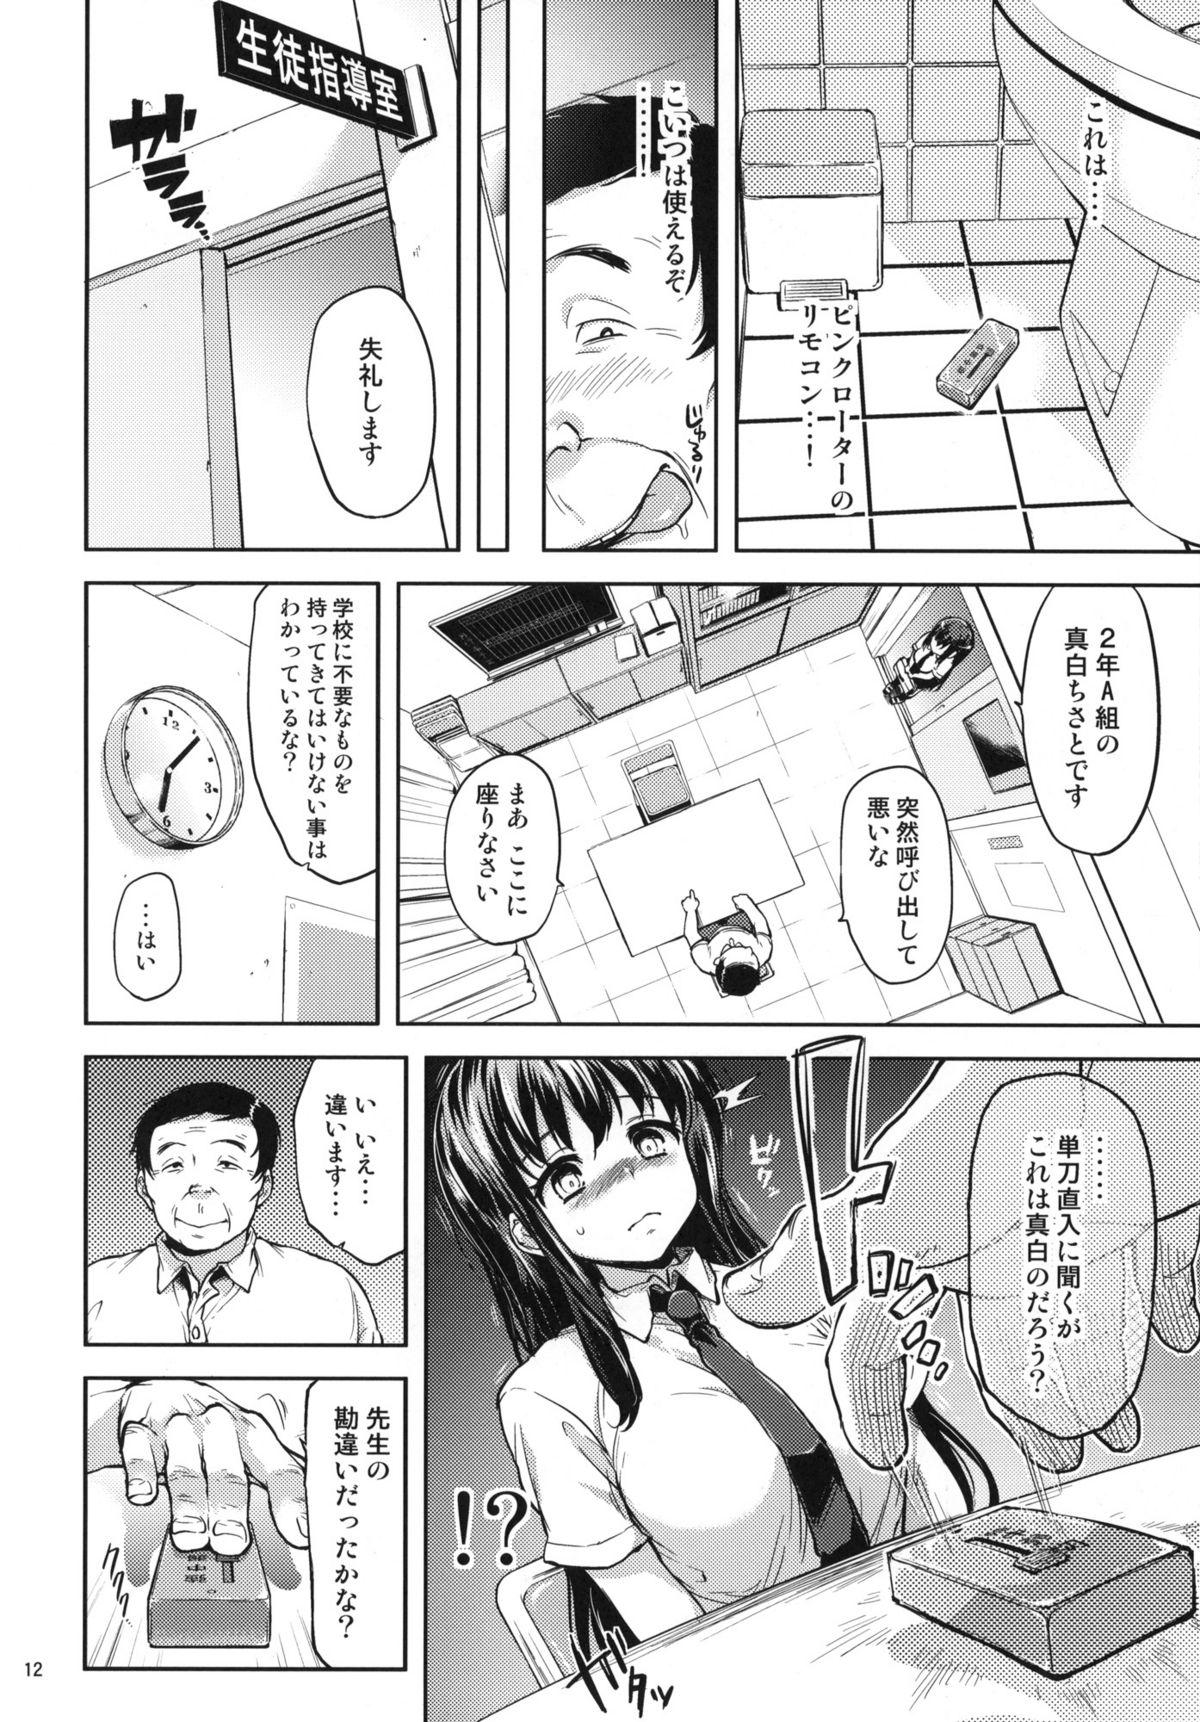 Old Chii-chan Kaihatsu Nikki 3 Special Locations - Page 11